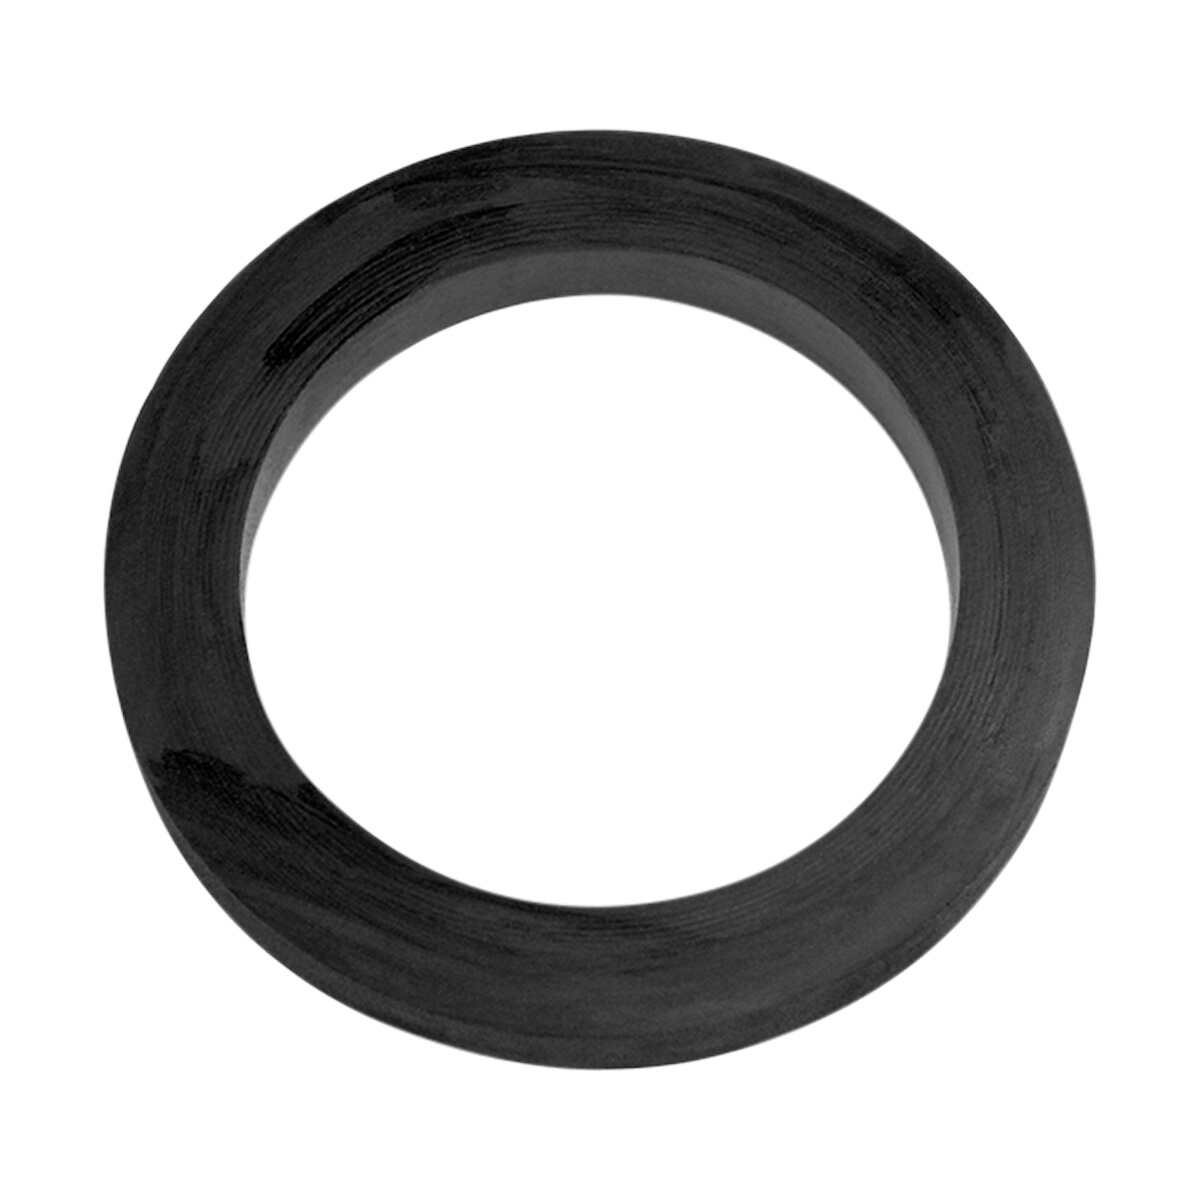 EPDM Camlock Replacement Gasket - 1-in